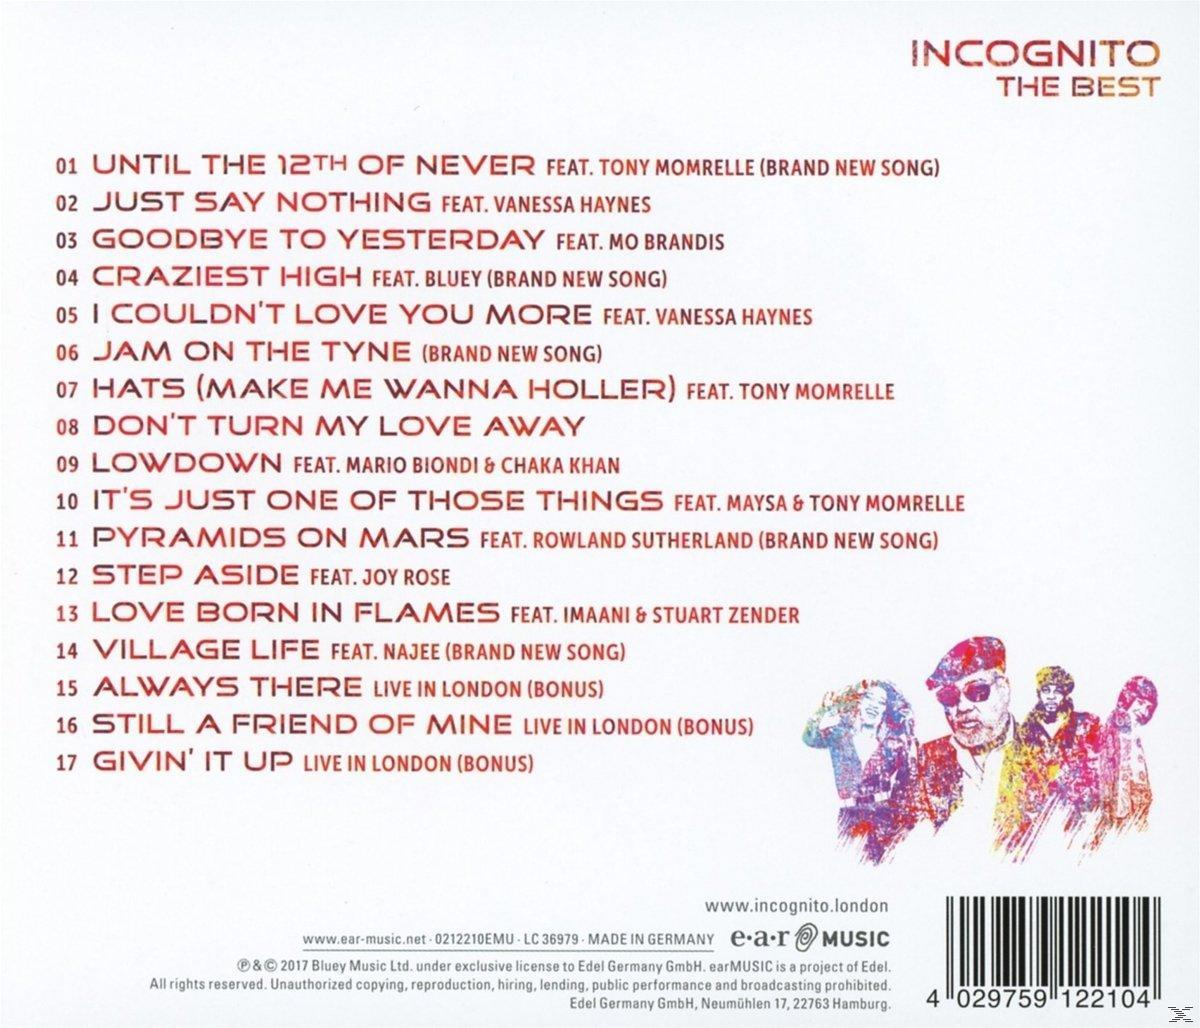 Best - (CD) The Incognito -